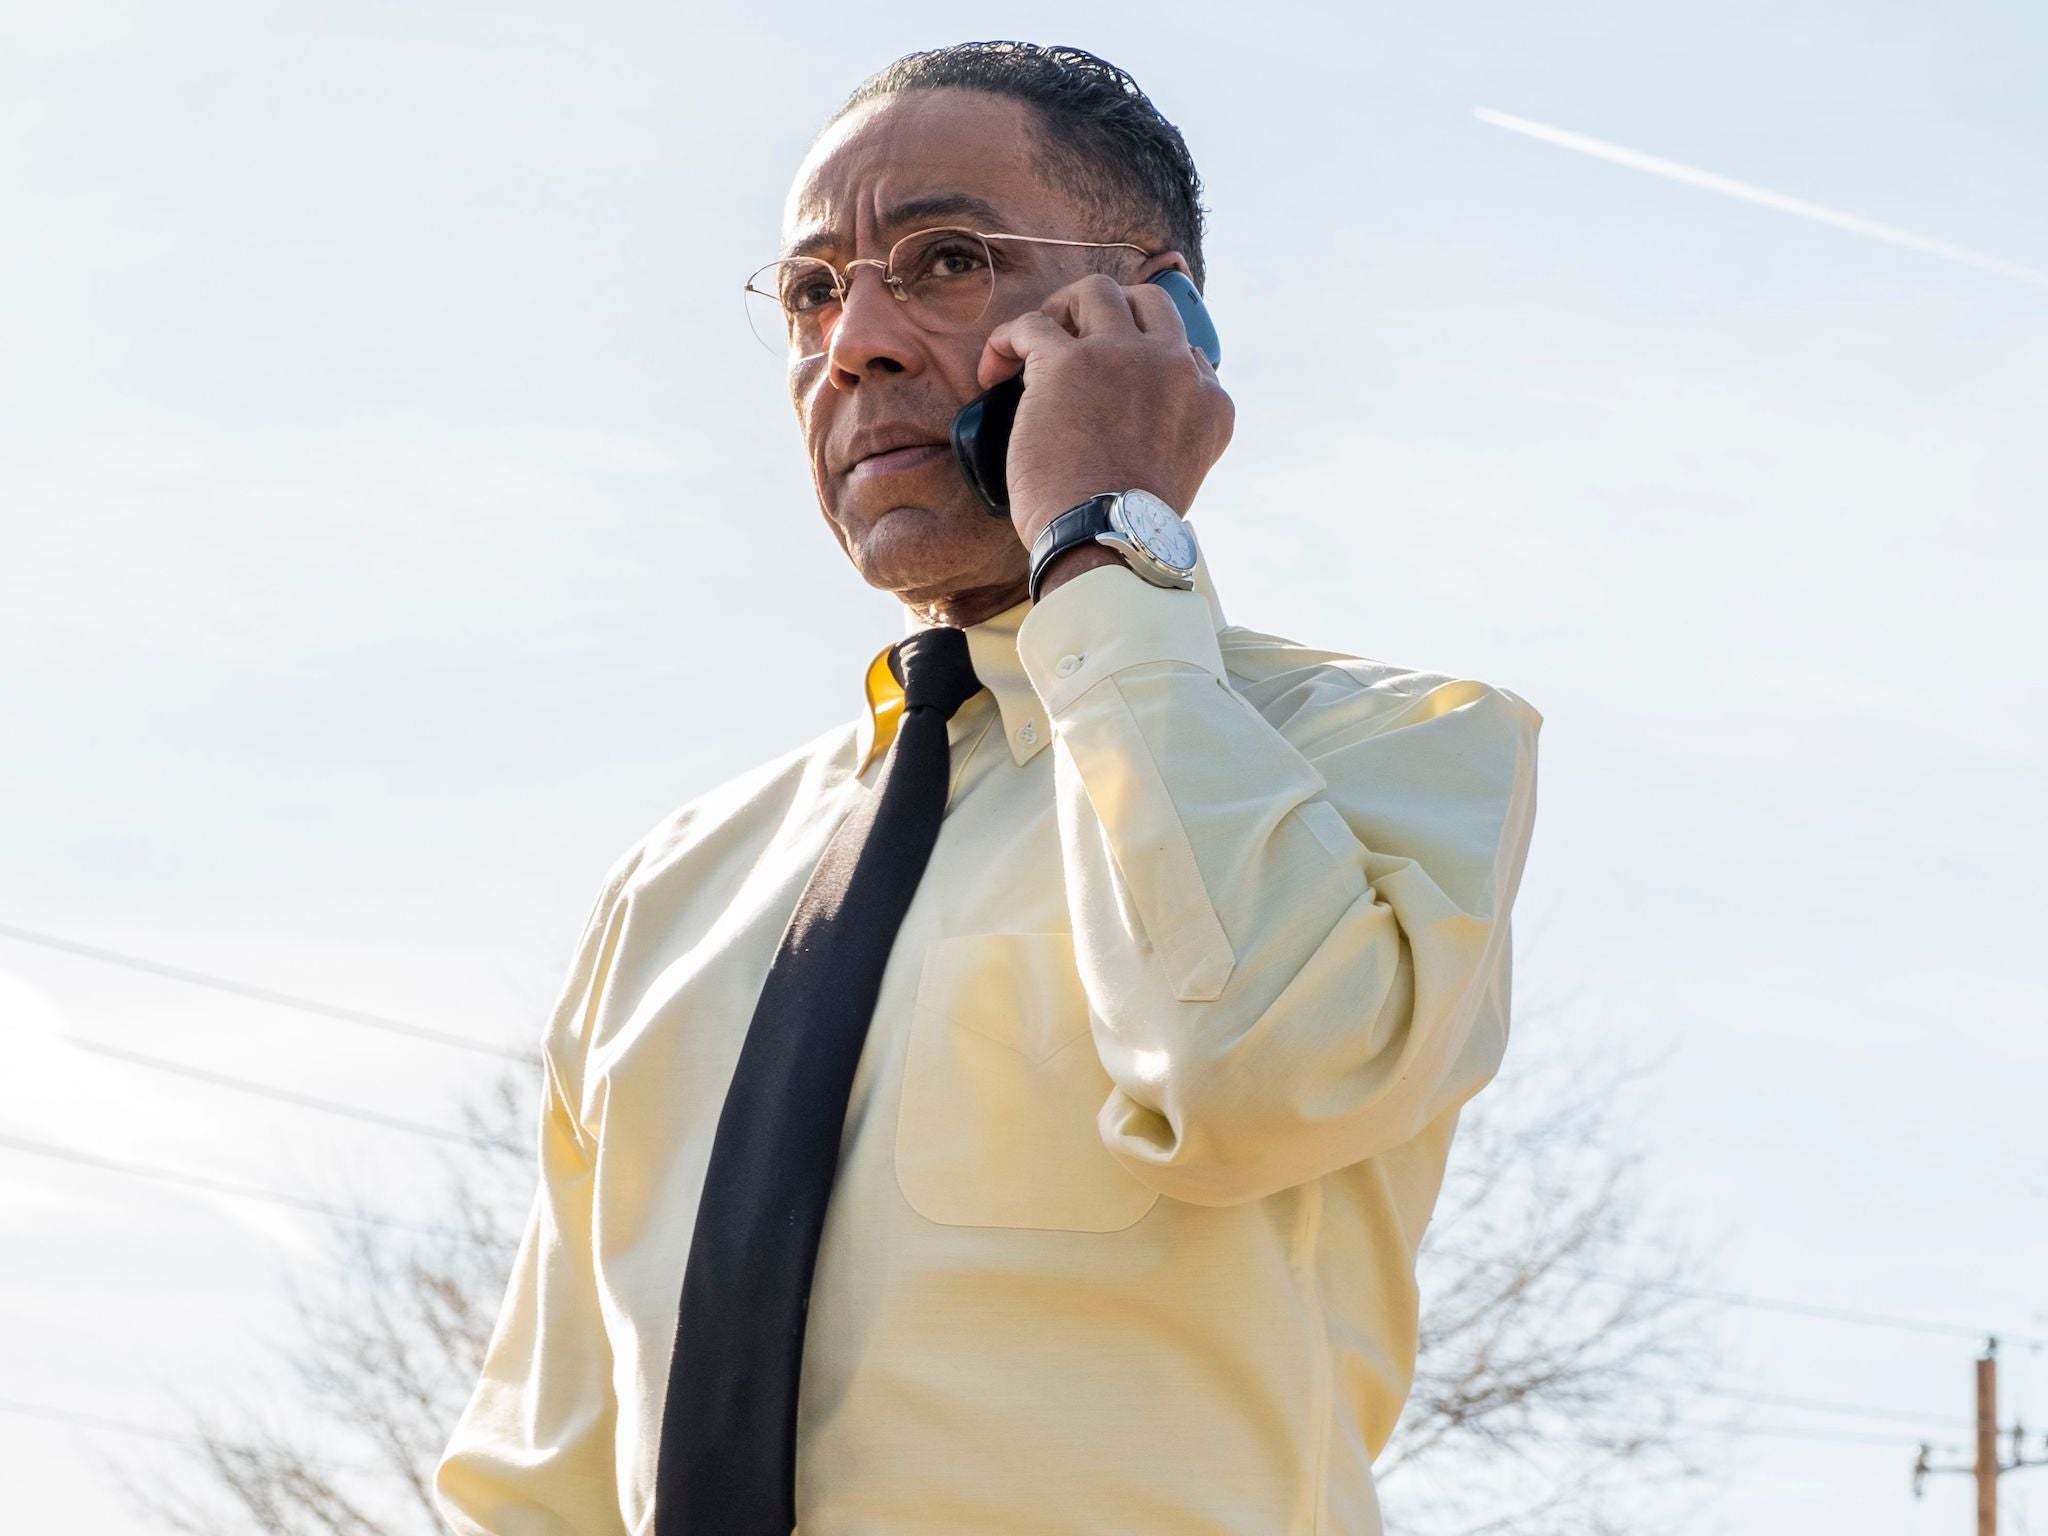 Giancarlo Esposito as Gus Fring in a still from Better Call Saul